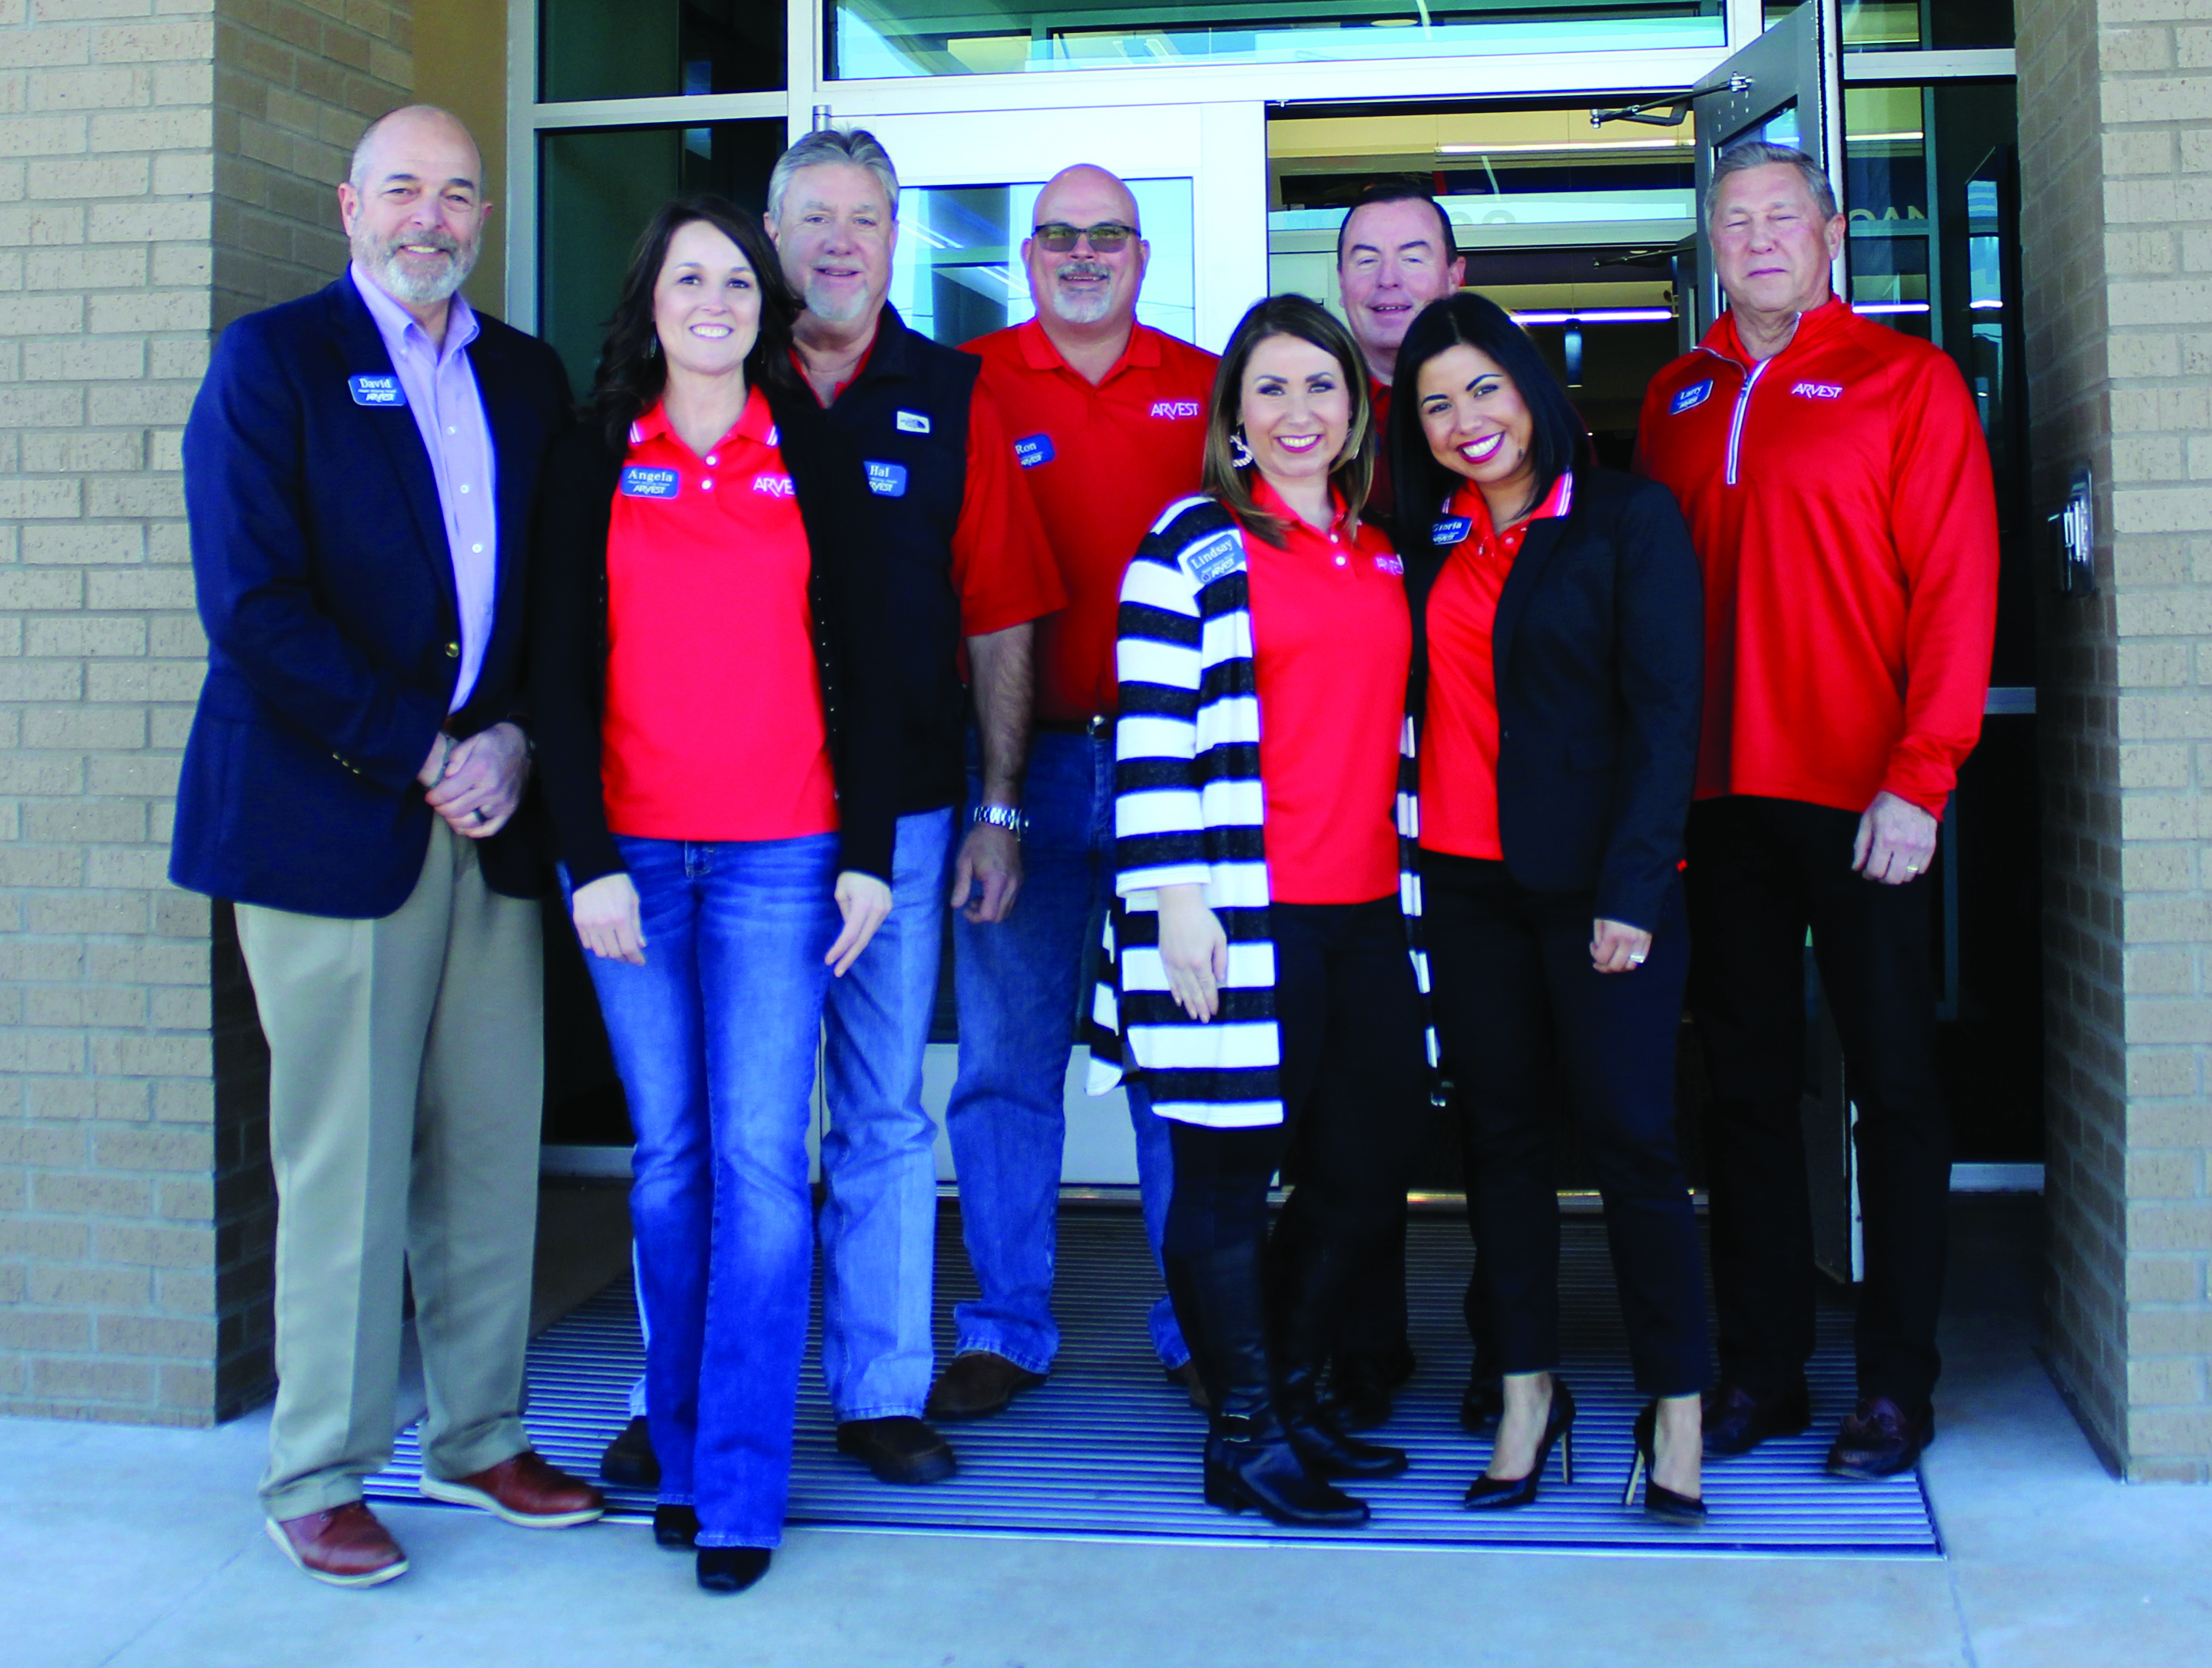 Several members of the Arvest Bank family came to celebrate the opening of the 2602 W. Gore branch. Pictured left to right: Chickasha Community President David Snell, Sales Coordinator Angela Spradlin, Duncan Community President Hal Labyer, Loan Manager Ron Martin, President and CEO of Southwest Oklahoma David Madigan, Sales Manager Gloria Martinez, and Community Business Development Representative Larry Benson. Southwest Ledger photos by Curtis Awbrey